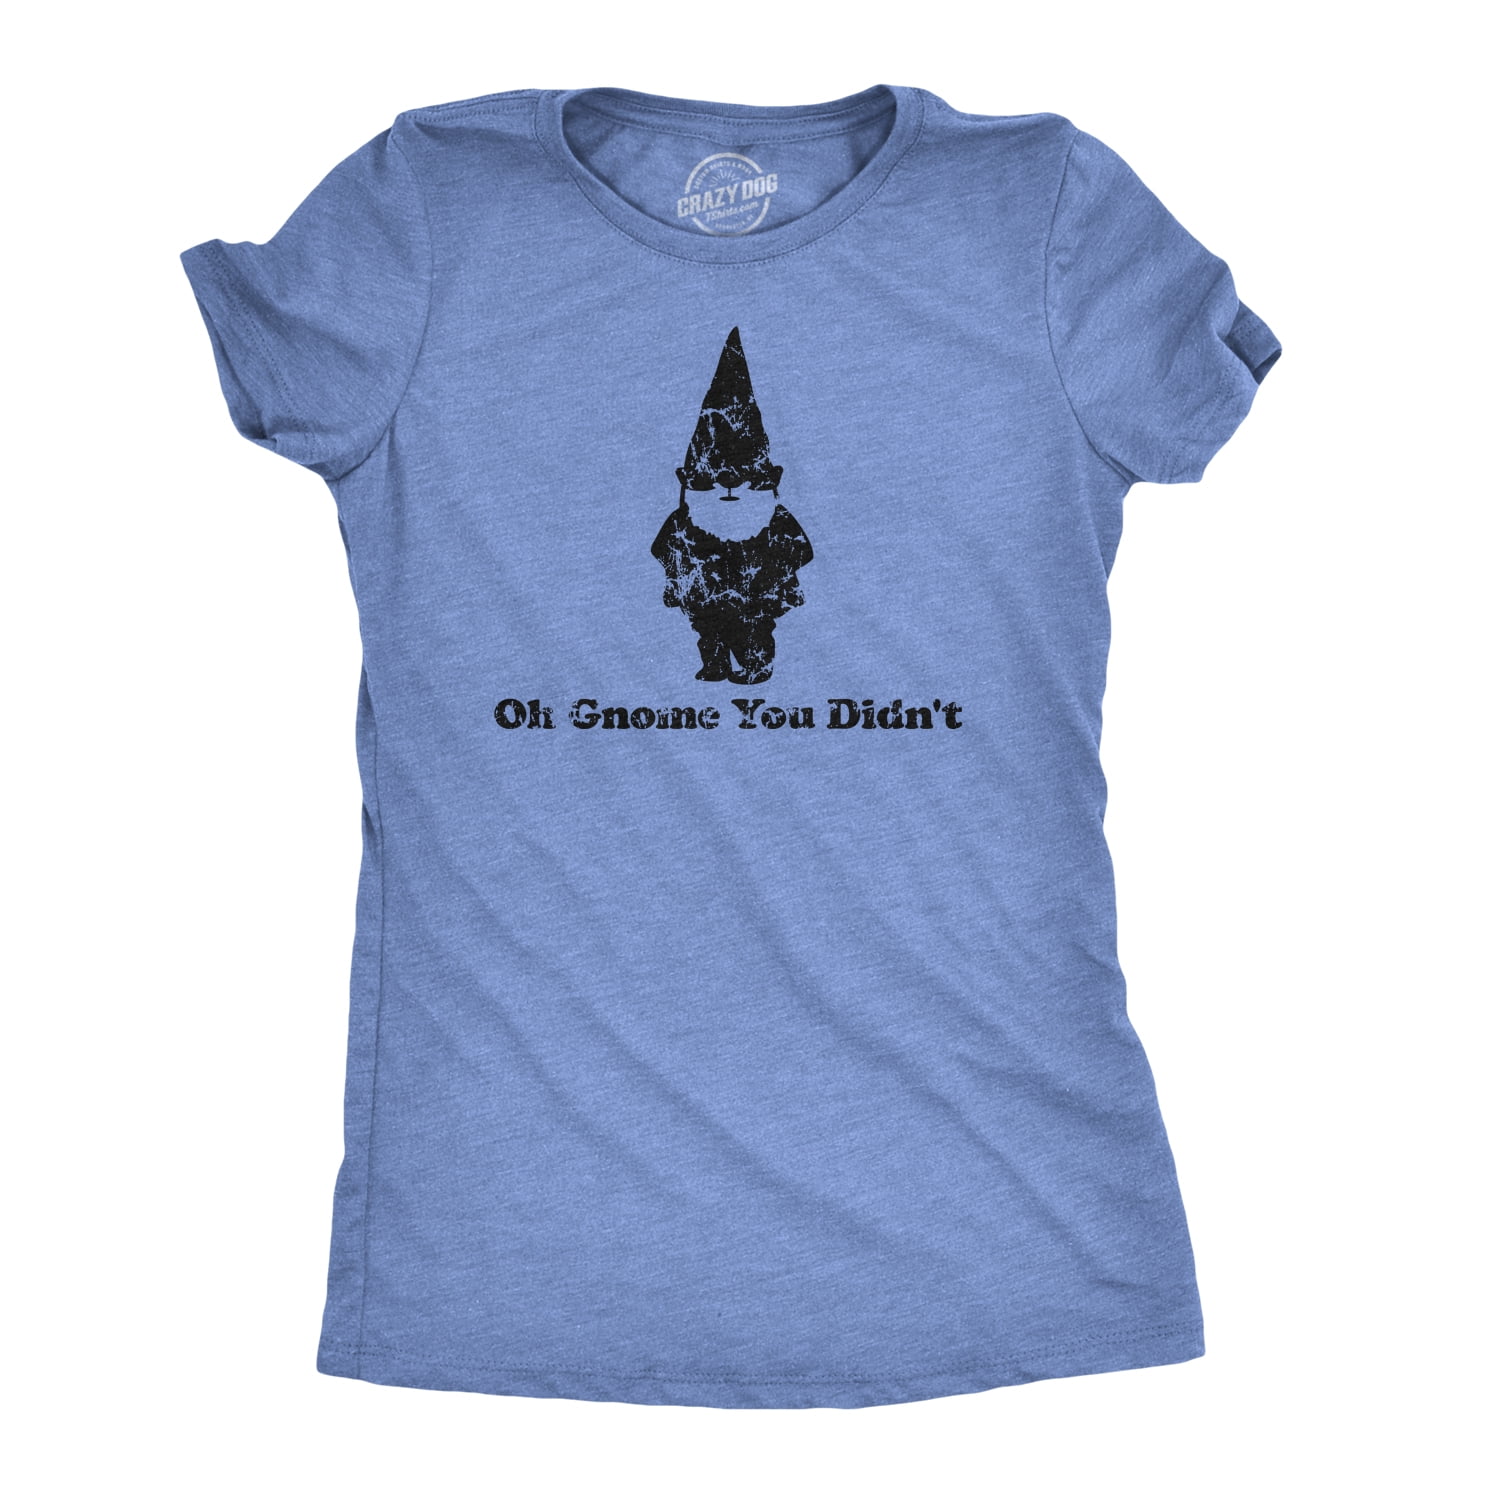 Tasty Threads Unisex Baby Come To The Dark Side We Have Bacon T-Shirt Romper Lt. Blue, 12 Months